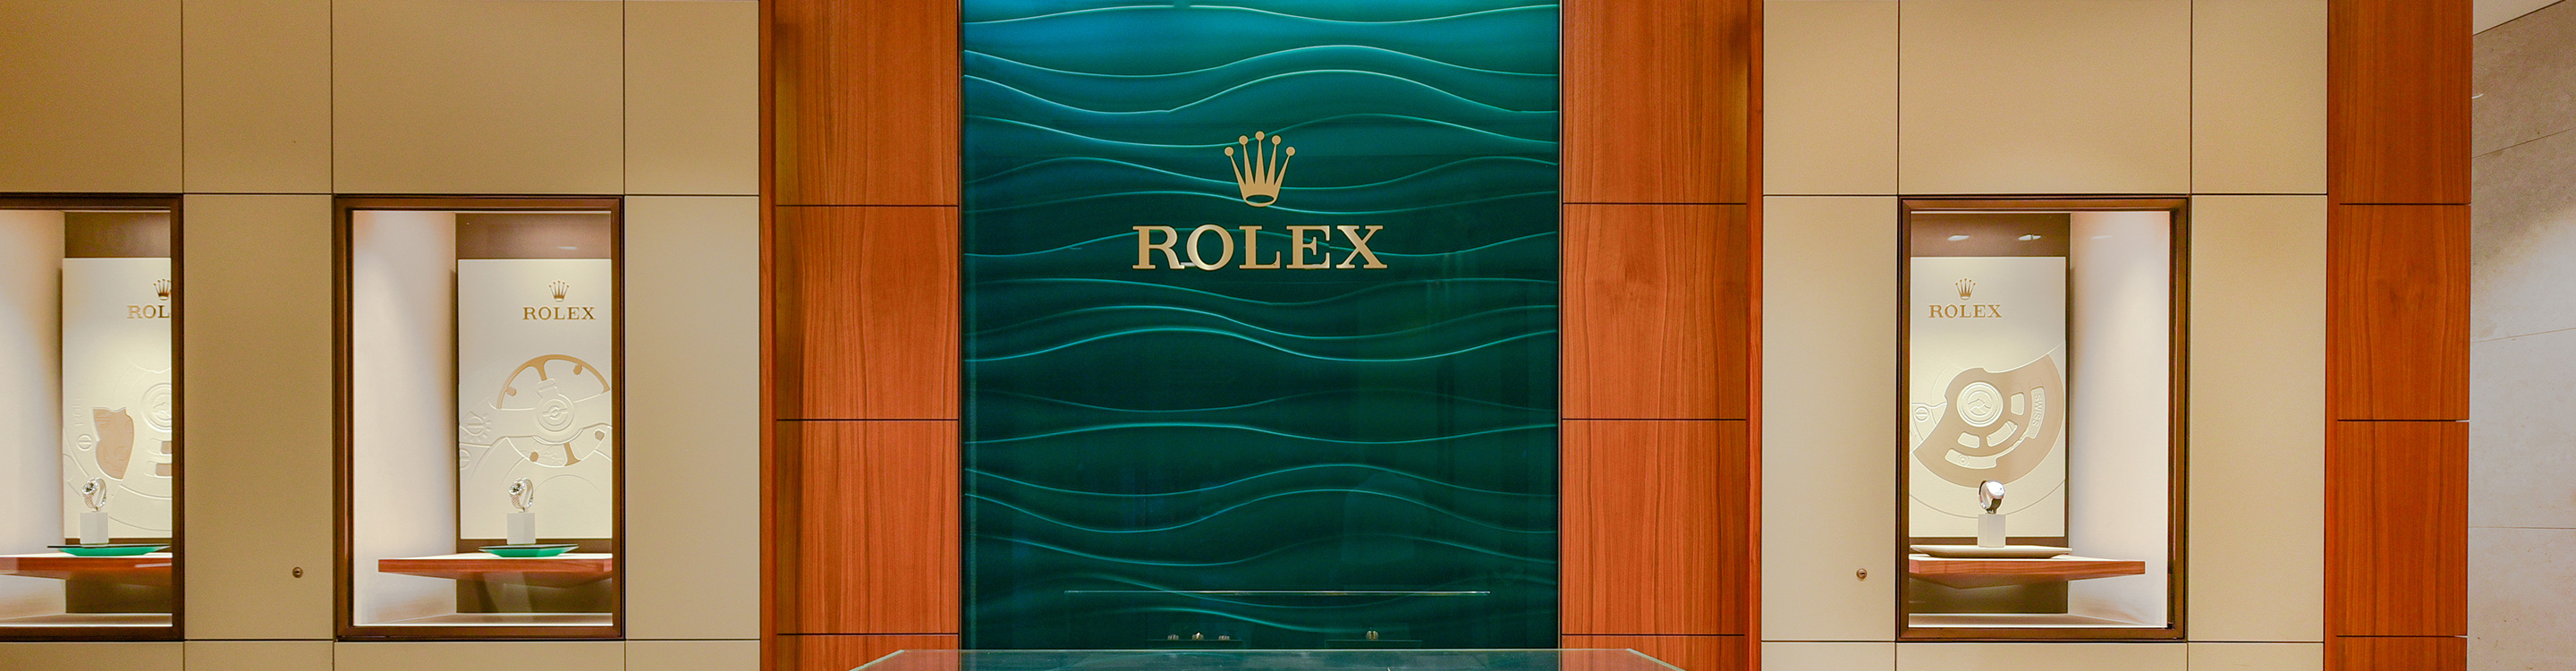 Contact Ethos - Rolex watches official retailer